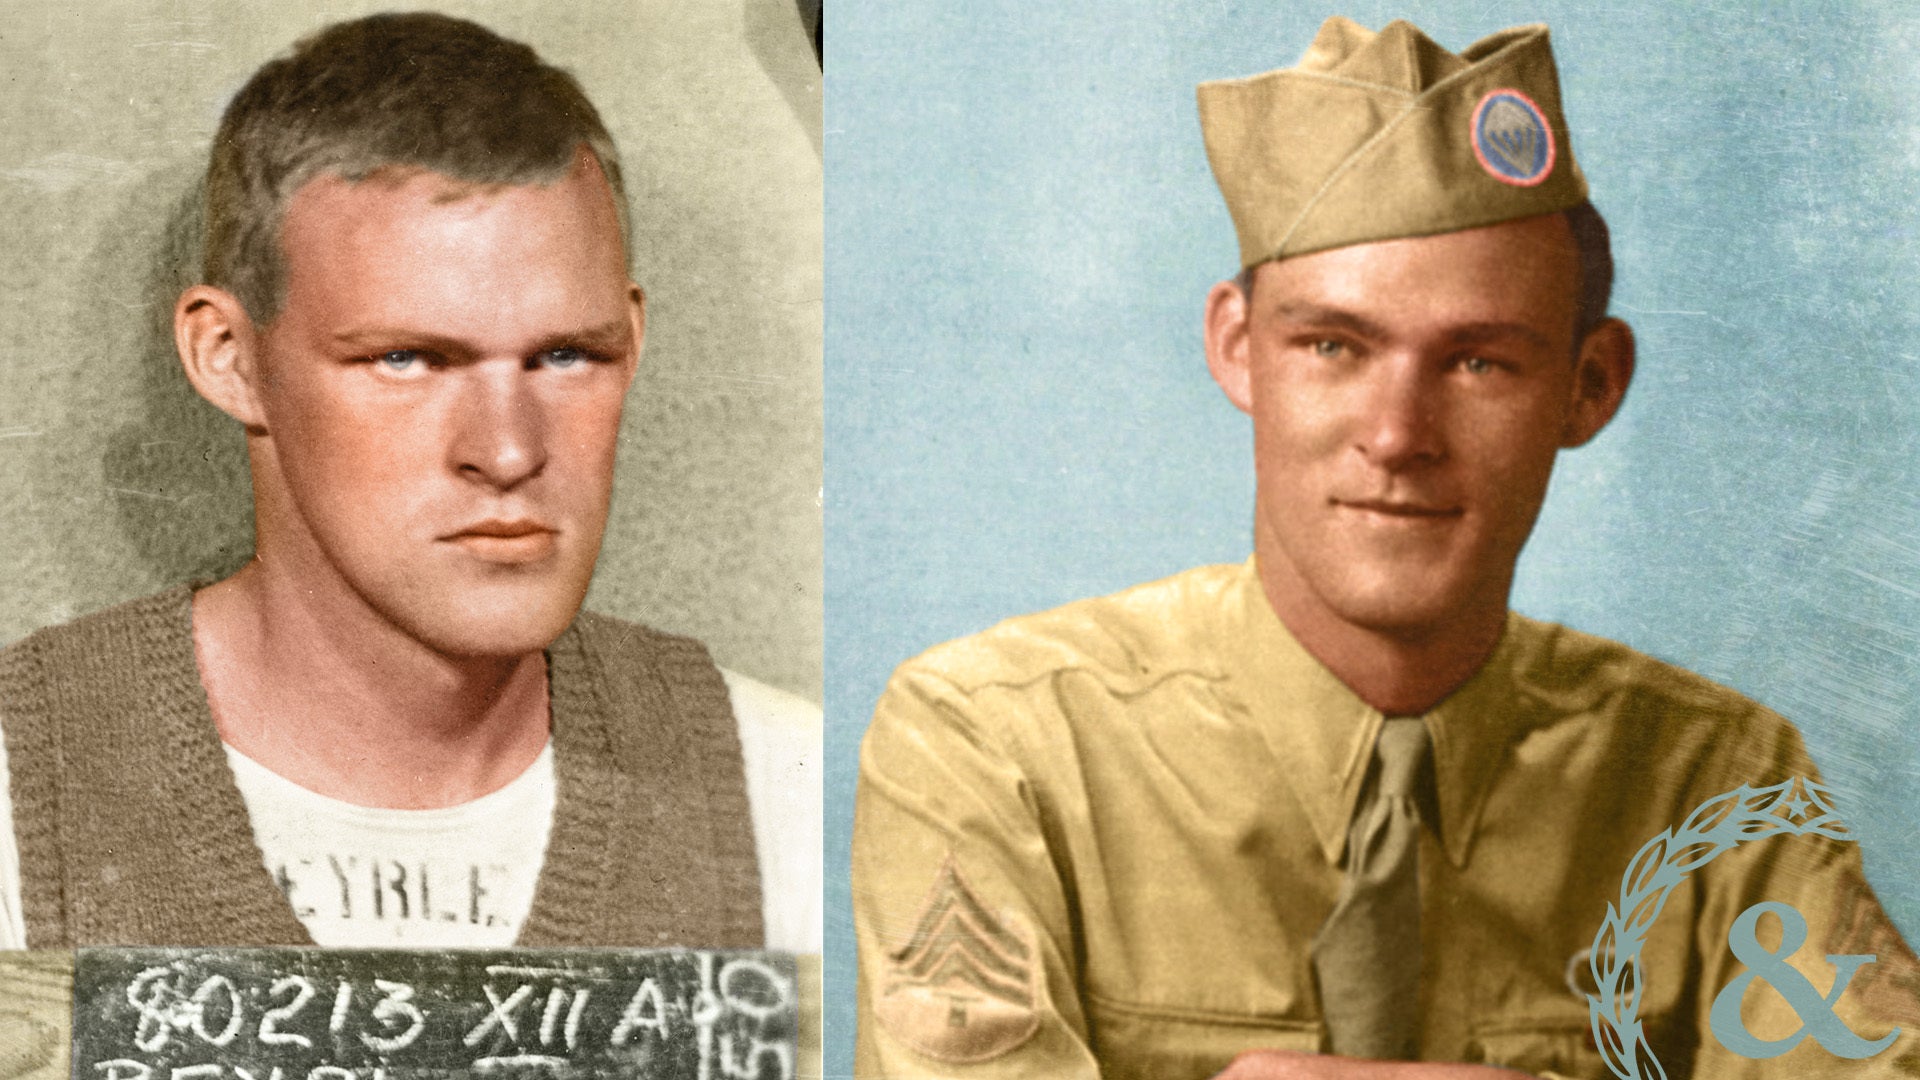 The wild story of how an American POW ended up fighting alongside the Soviets in WWII